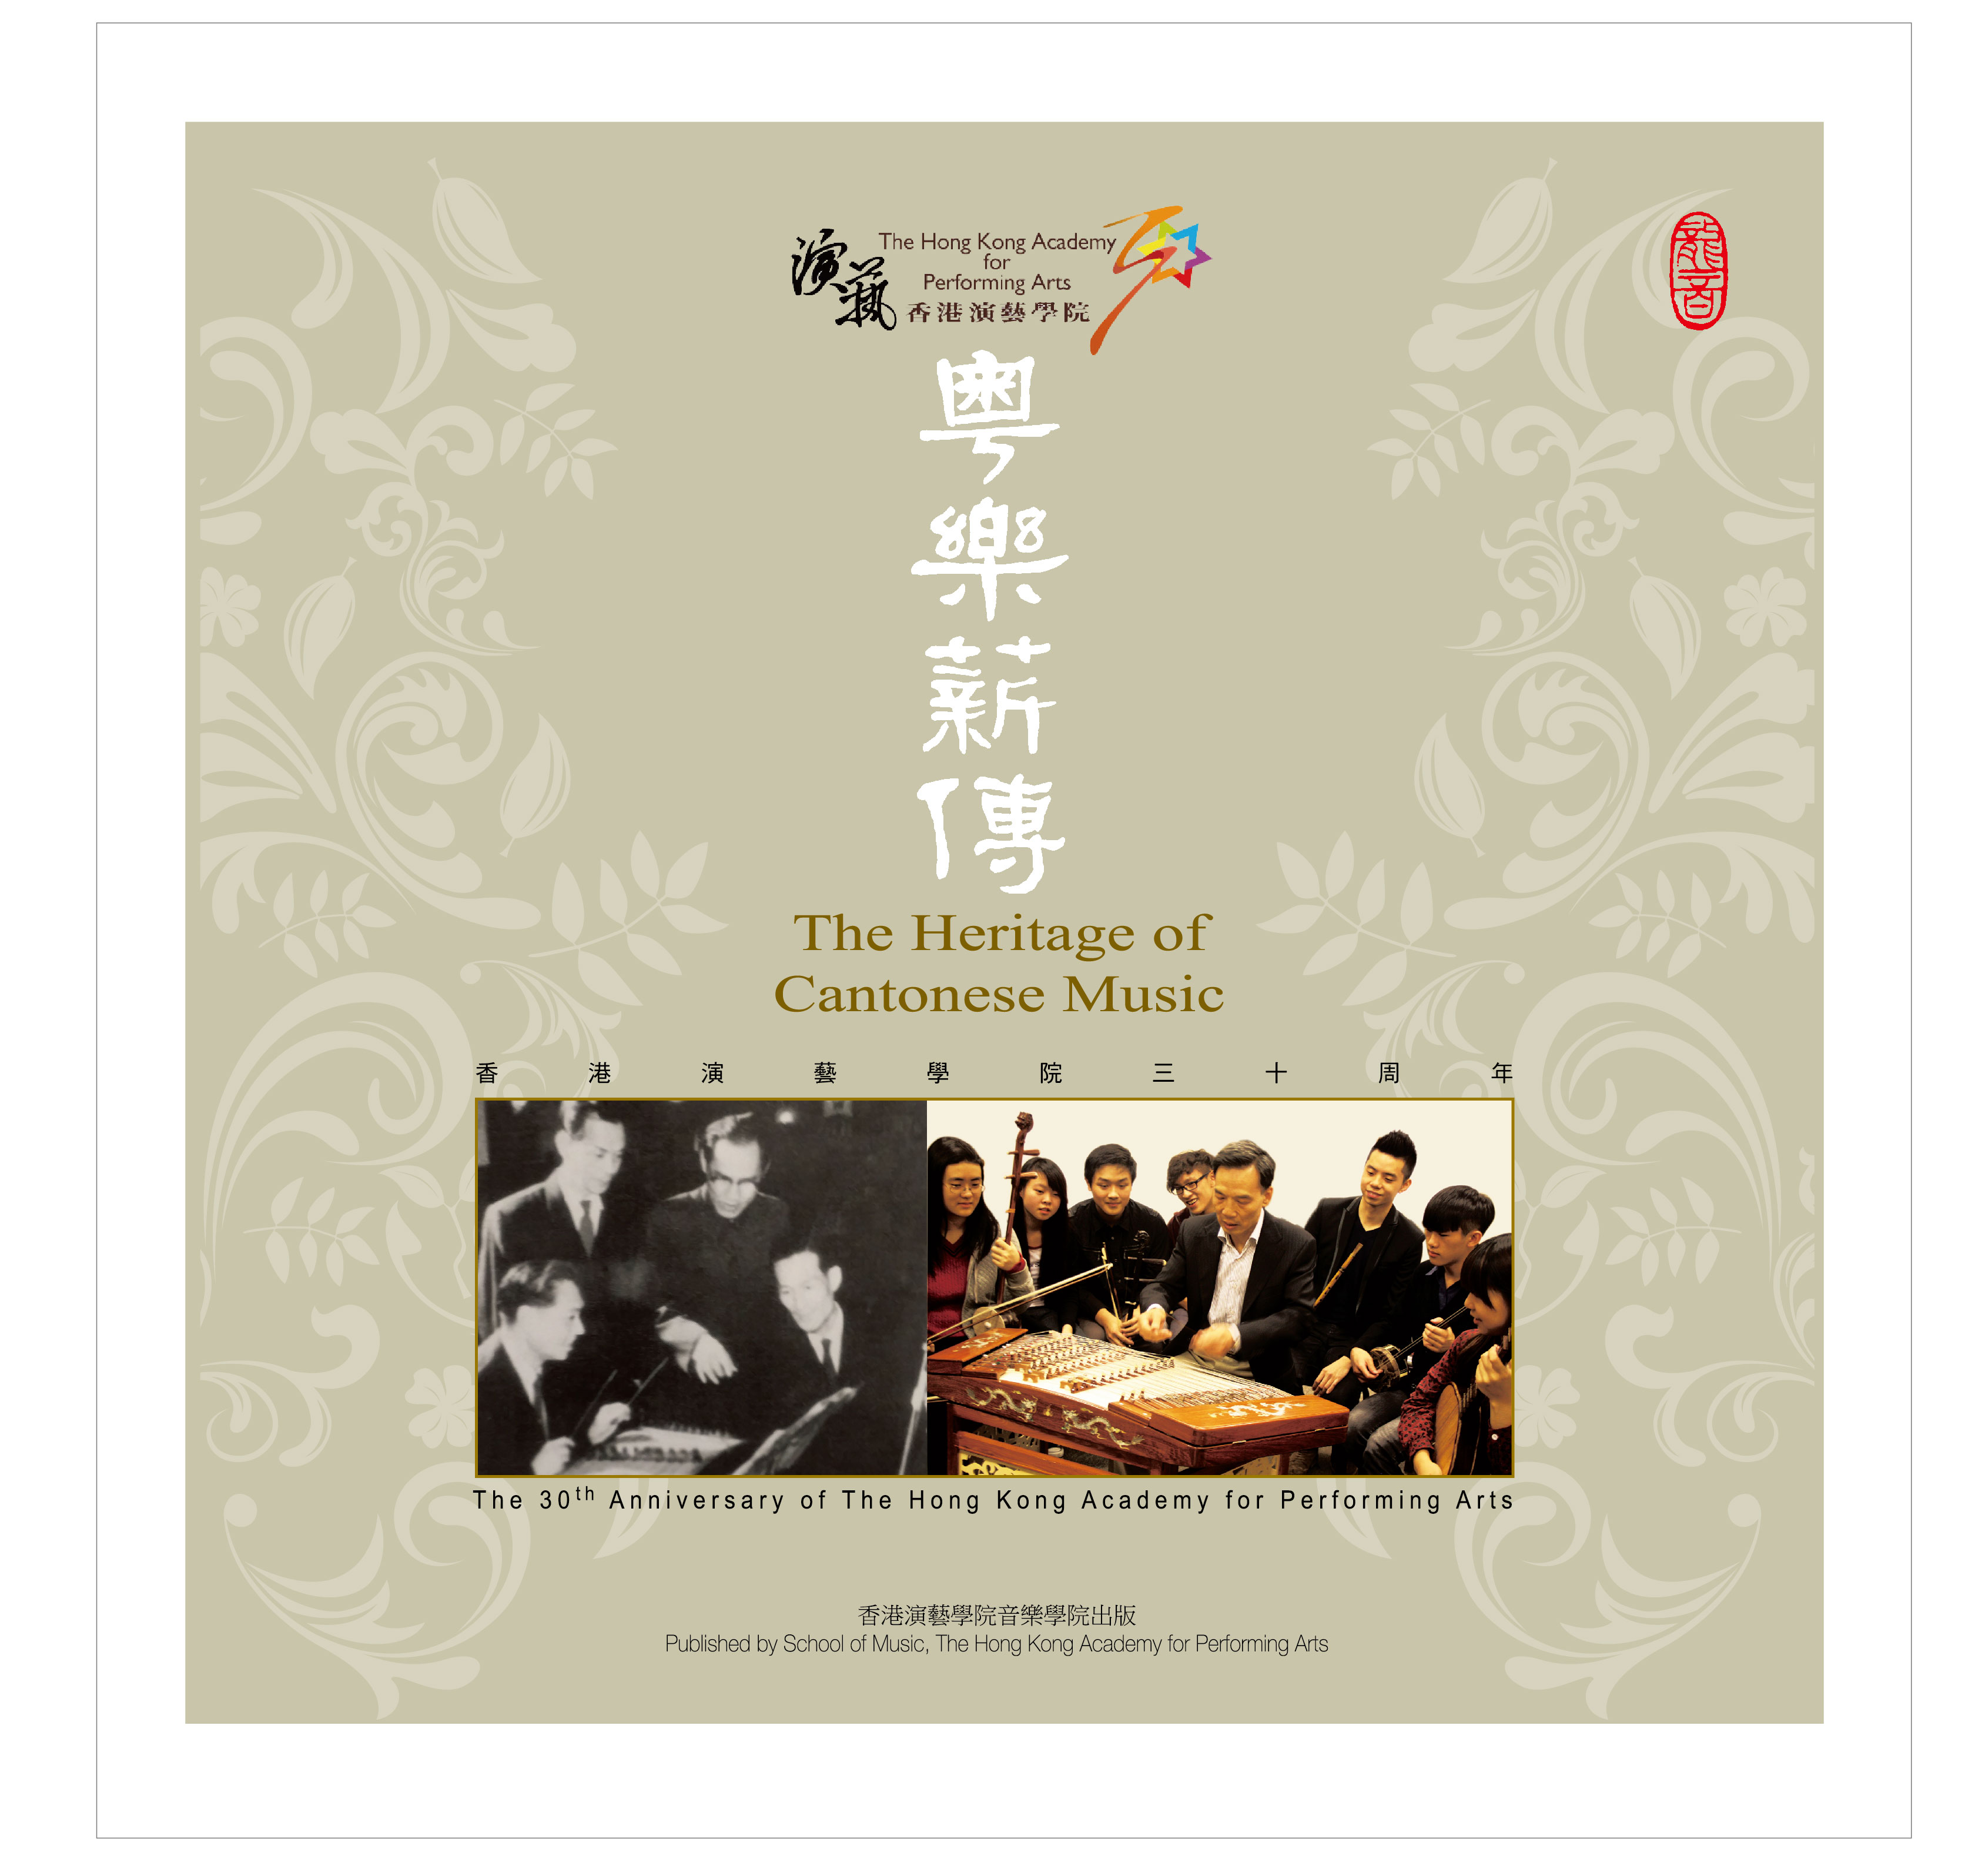 The Heritage of Cantonese Music